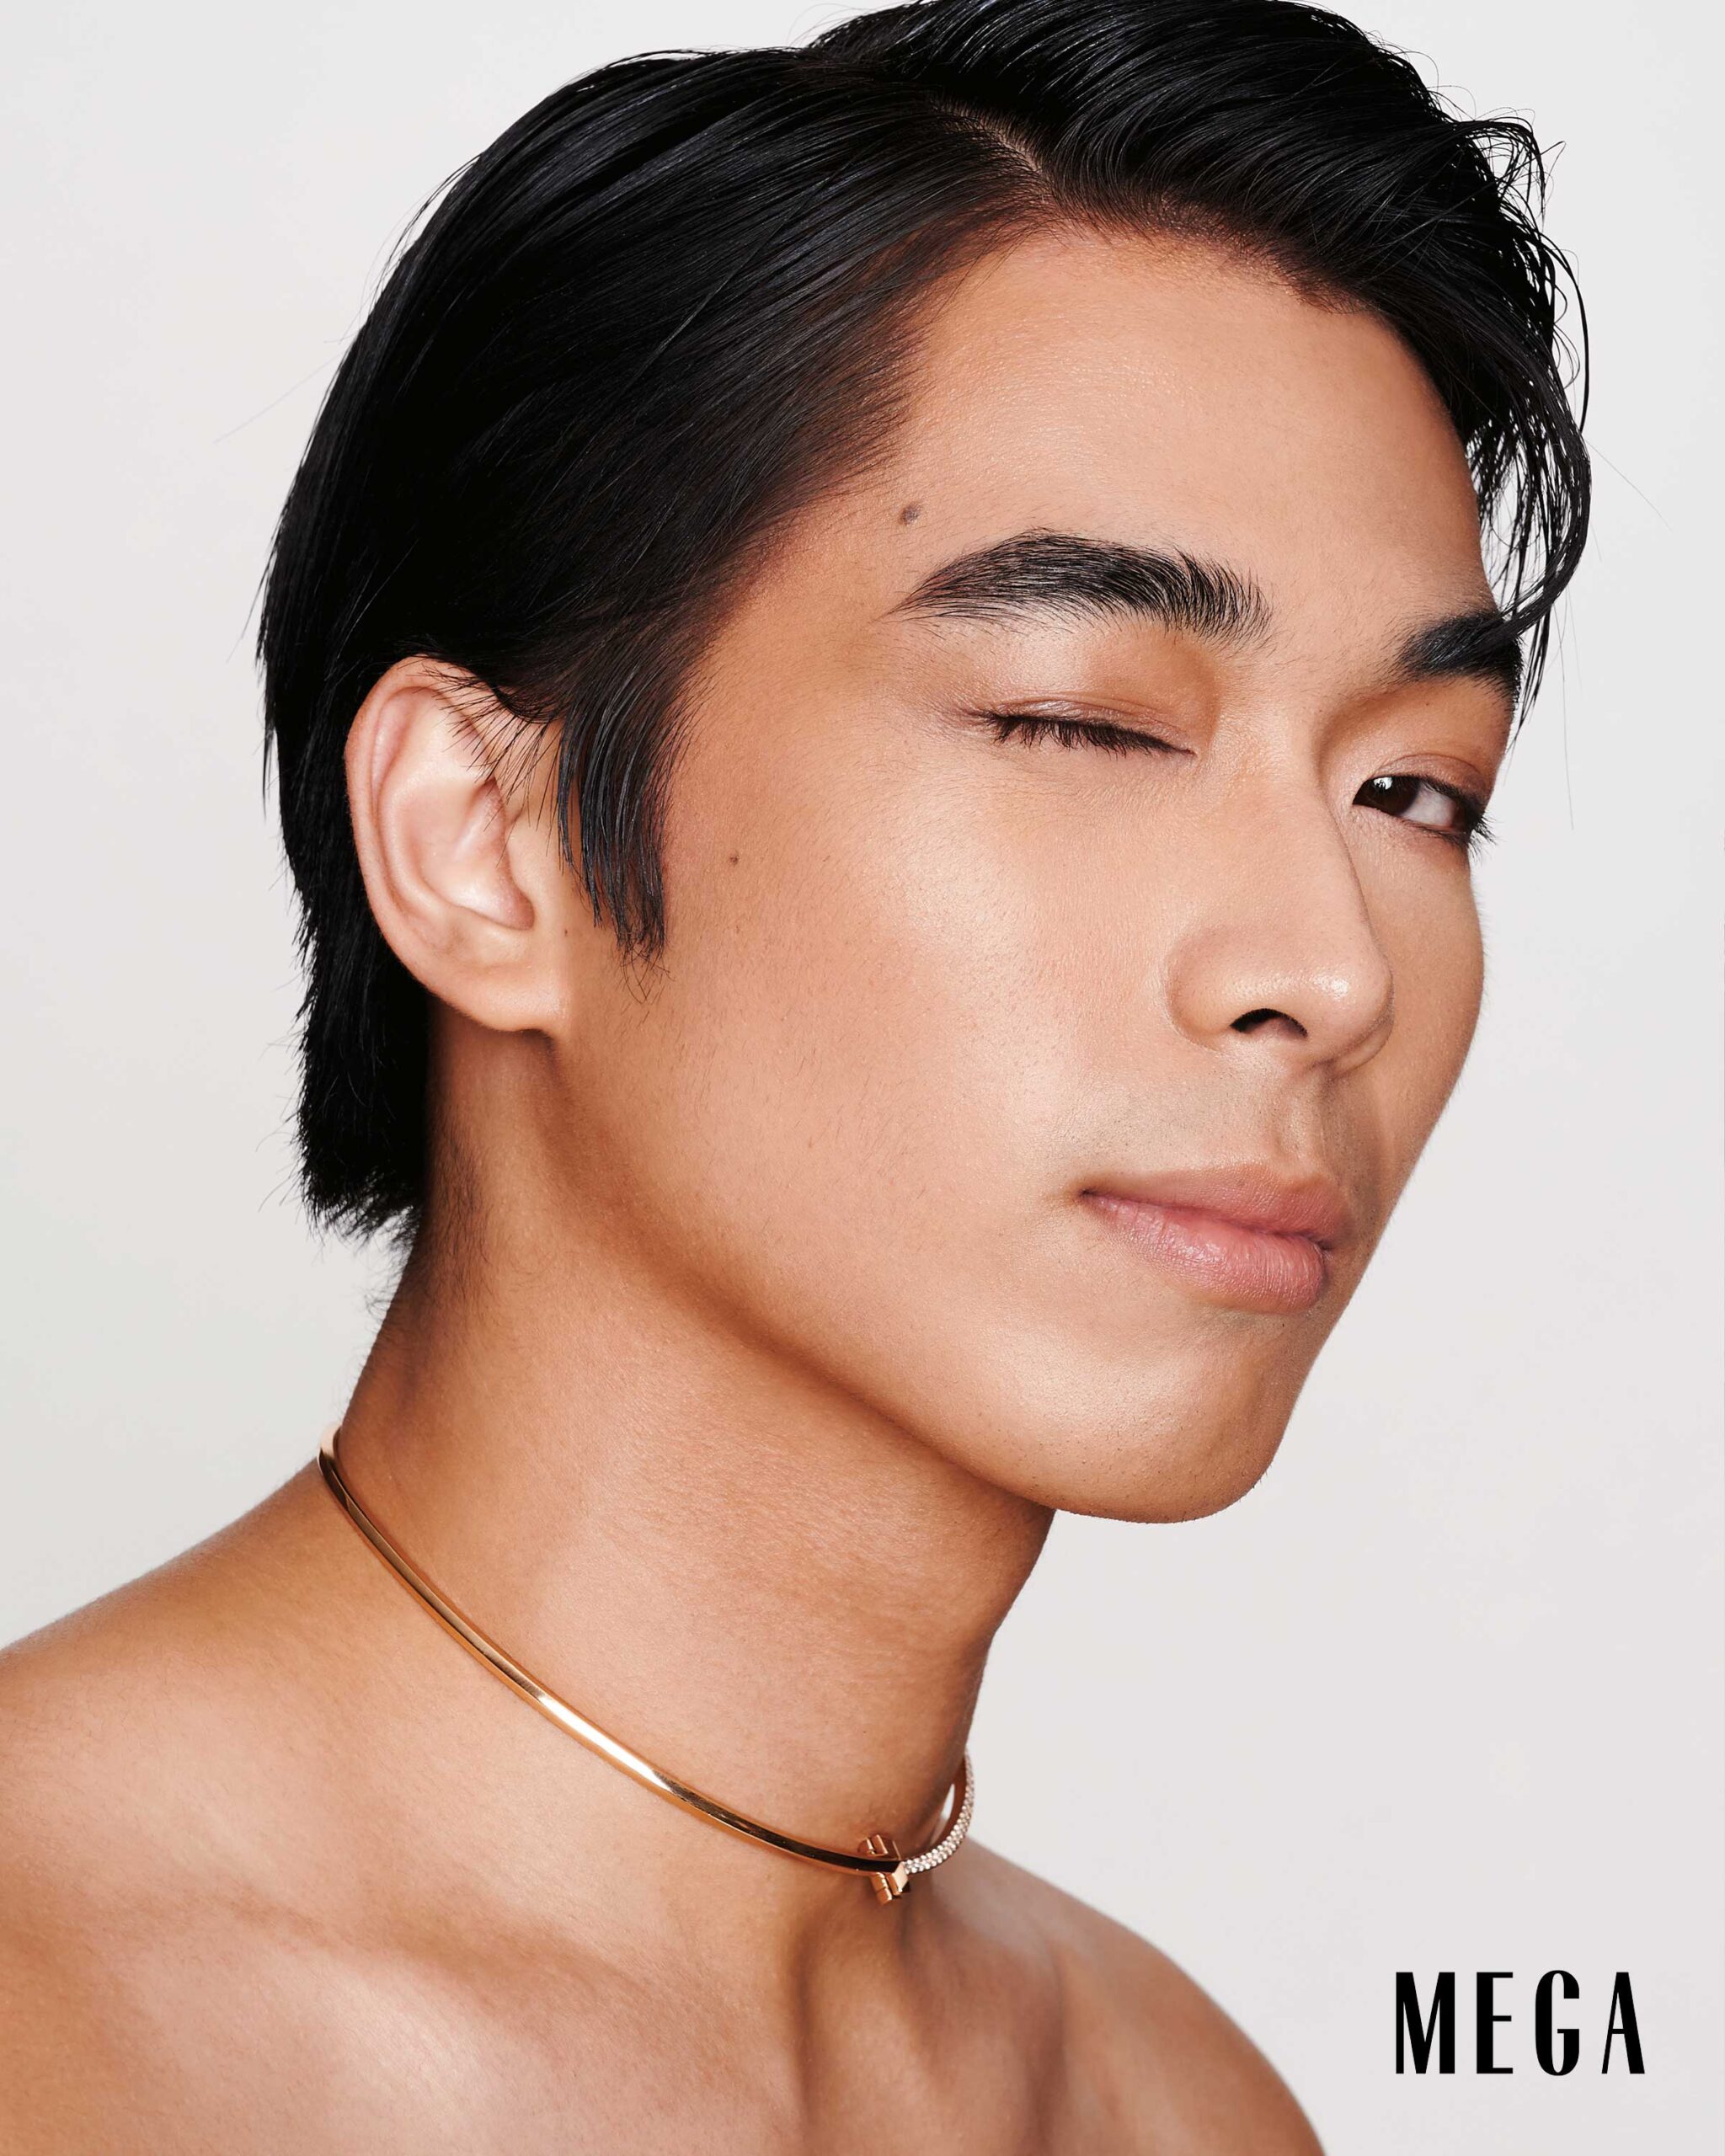 Gelo Rivera is wearing a TIFFANY & CO. necklace